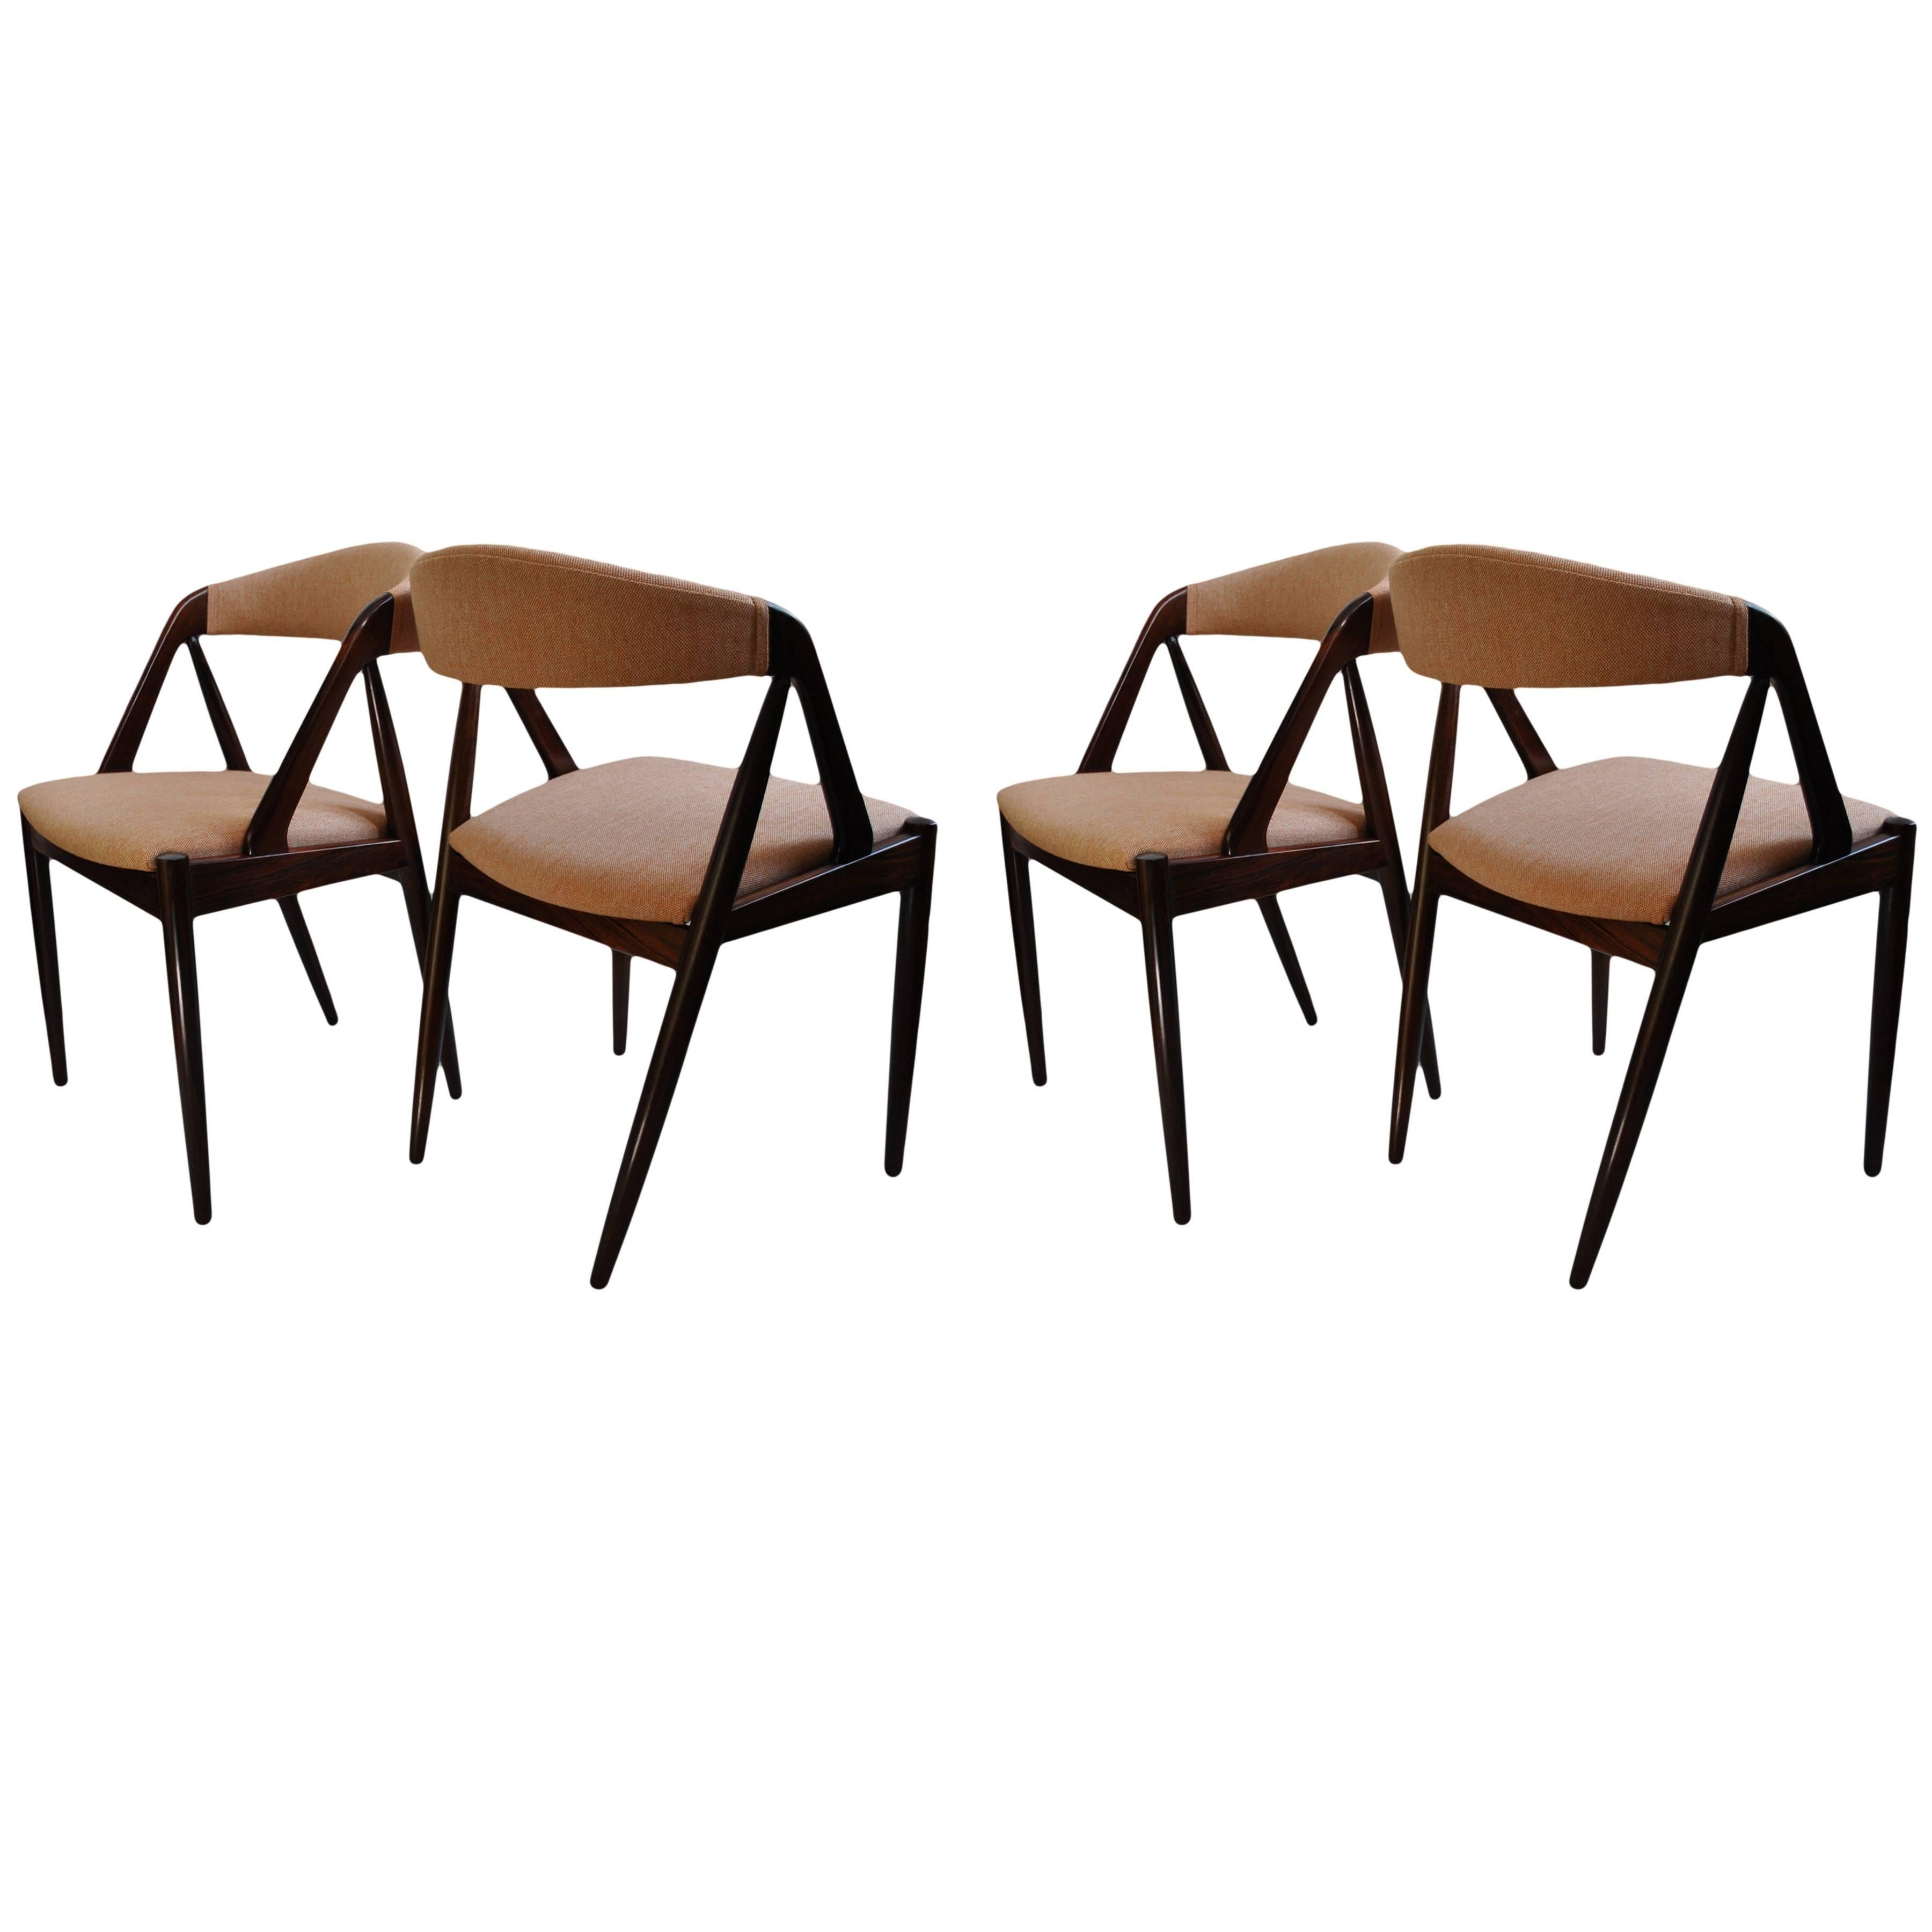 Kai Kristiansen Dining Chairs, Refurbished and reupholstered.